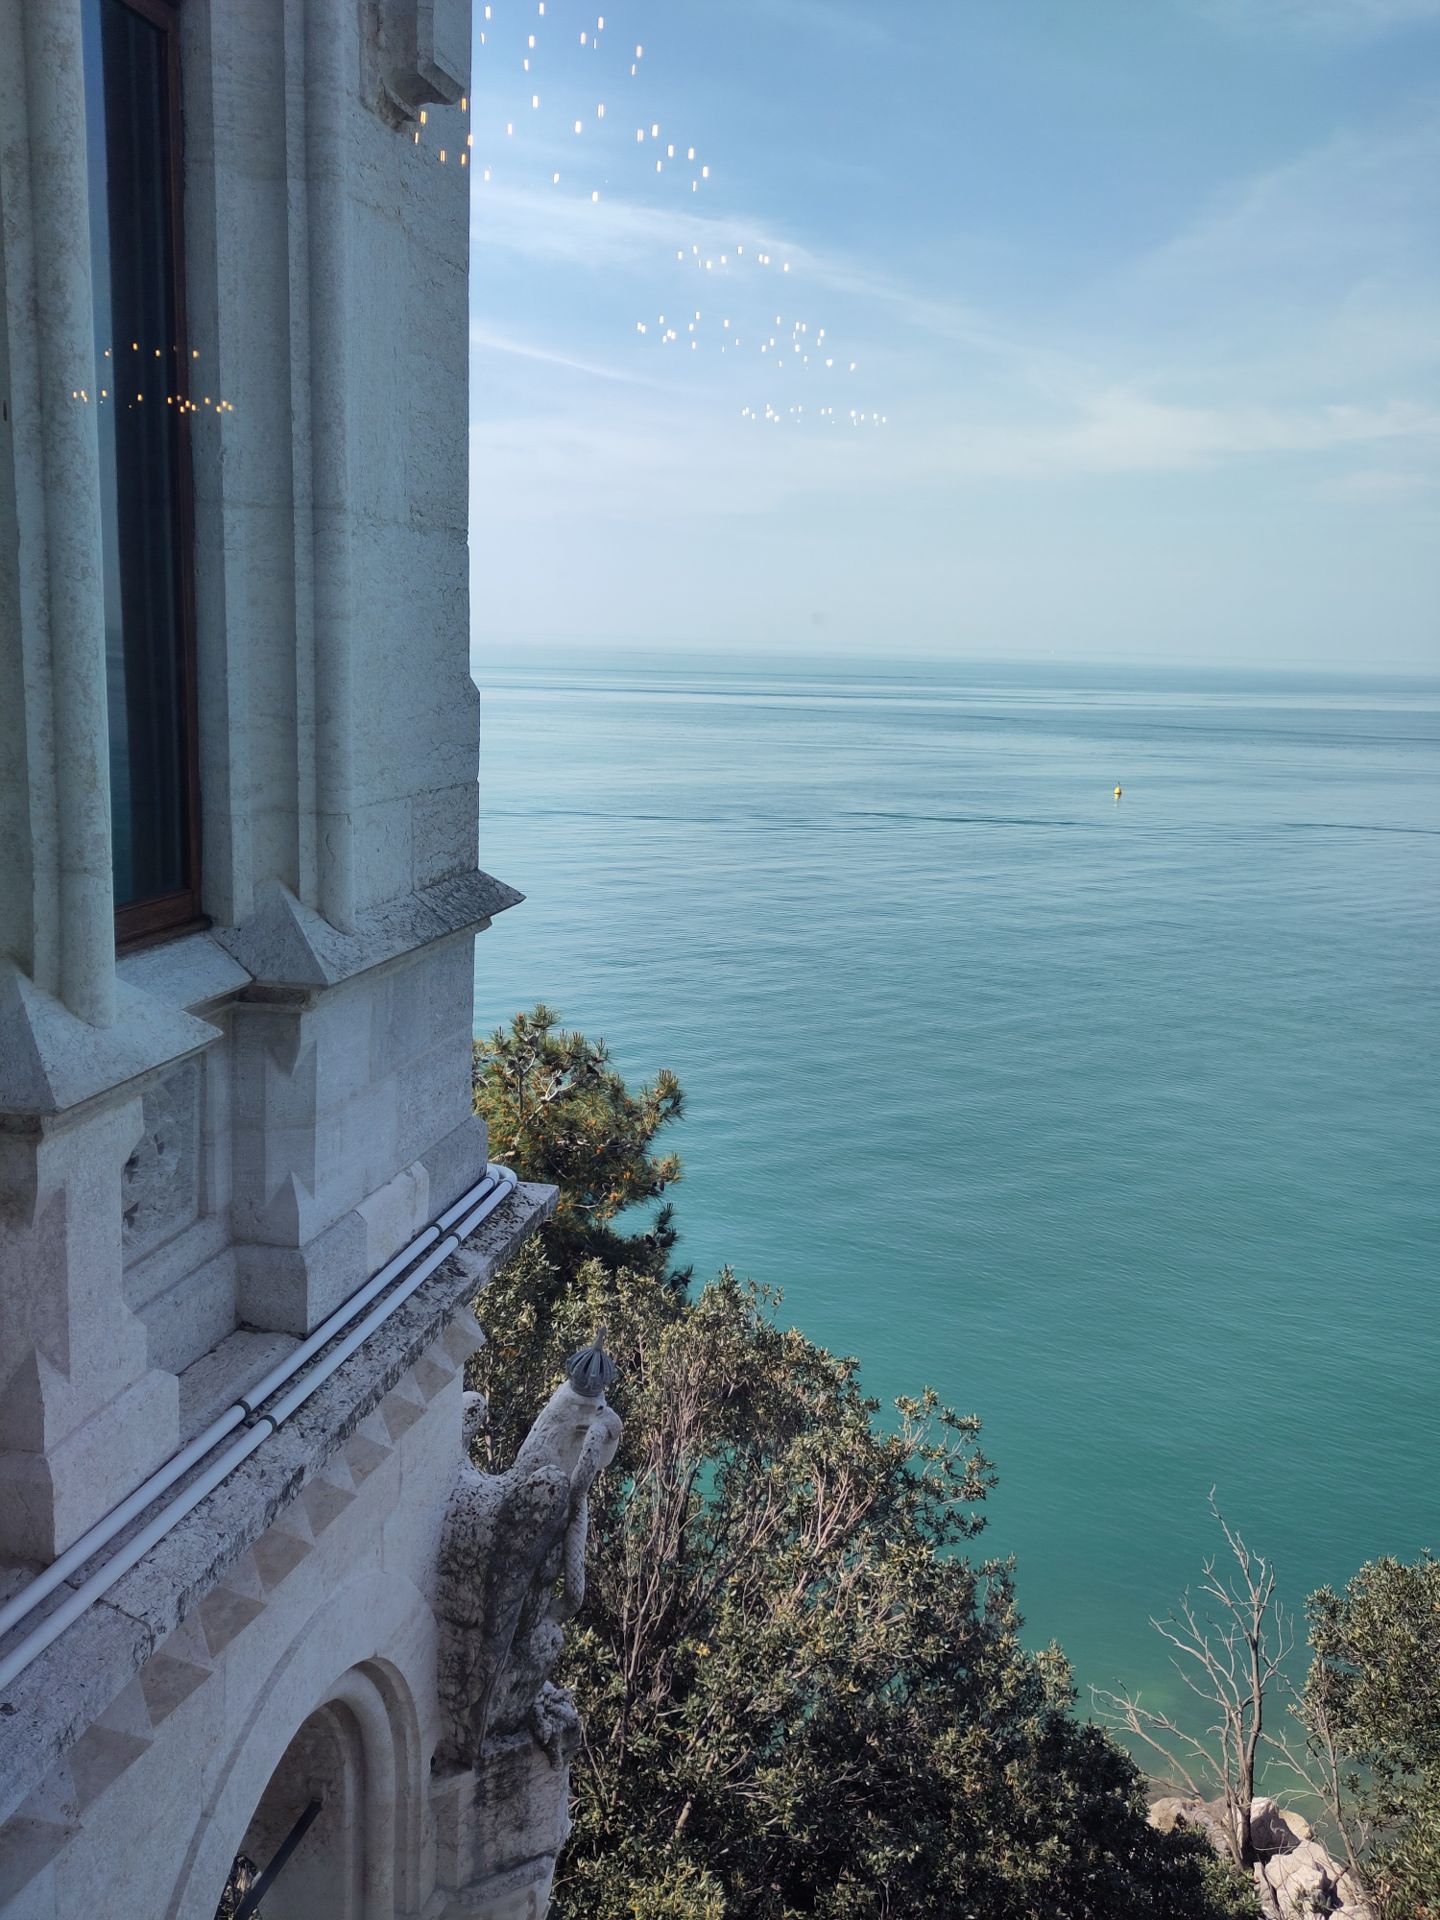 The sea, as seen from a window of the castle, with only a bush separating the building from the water.